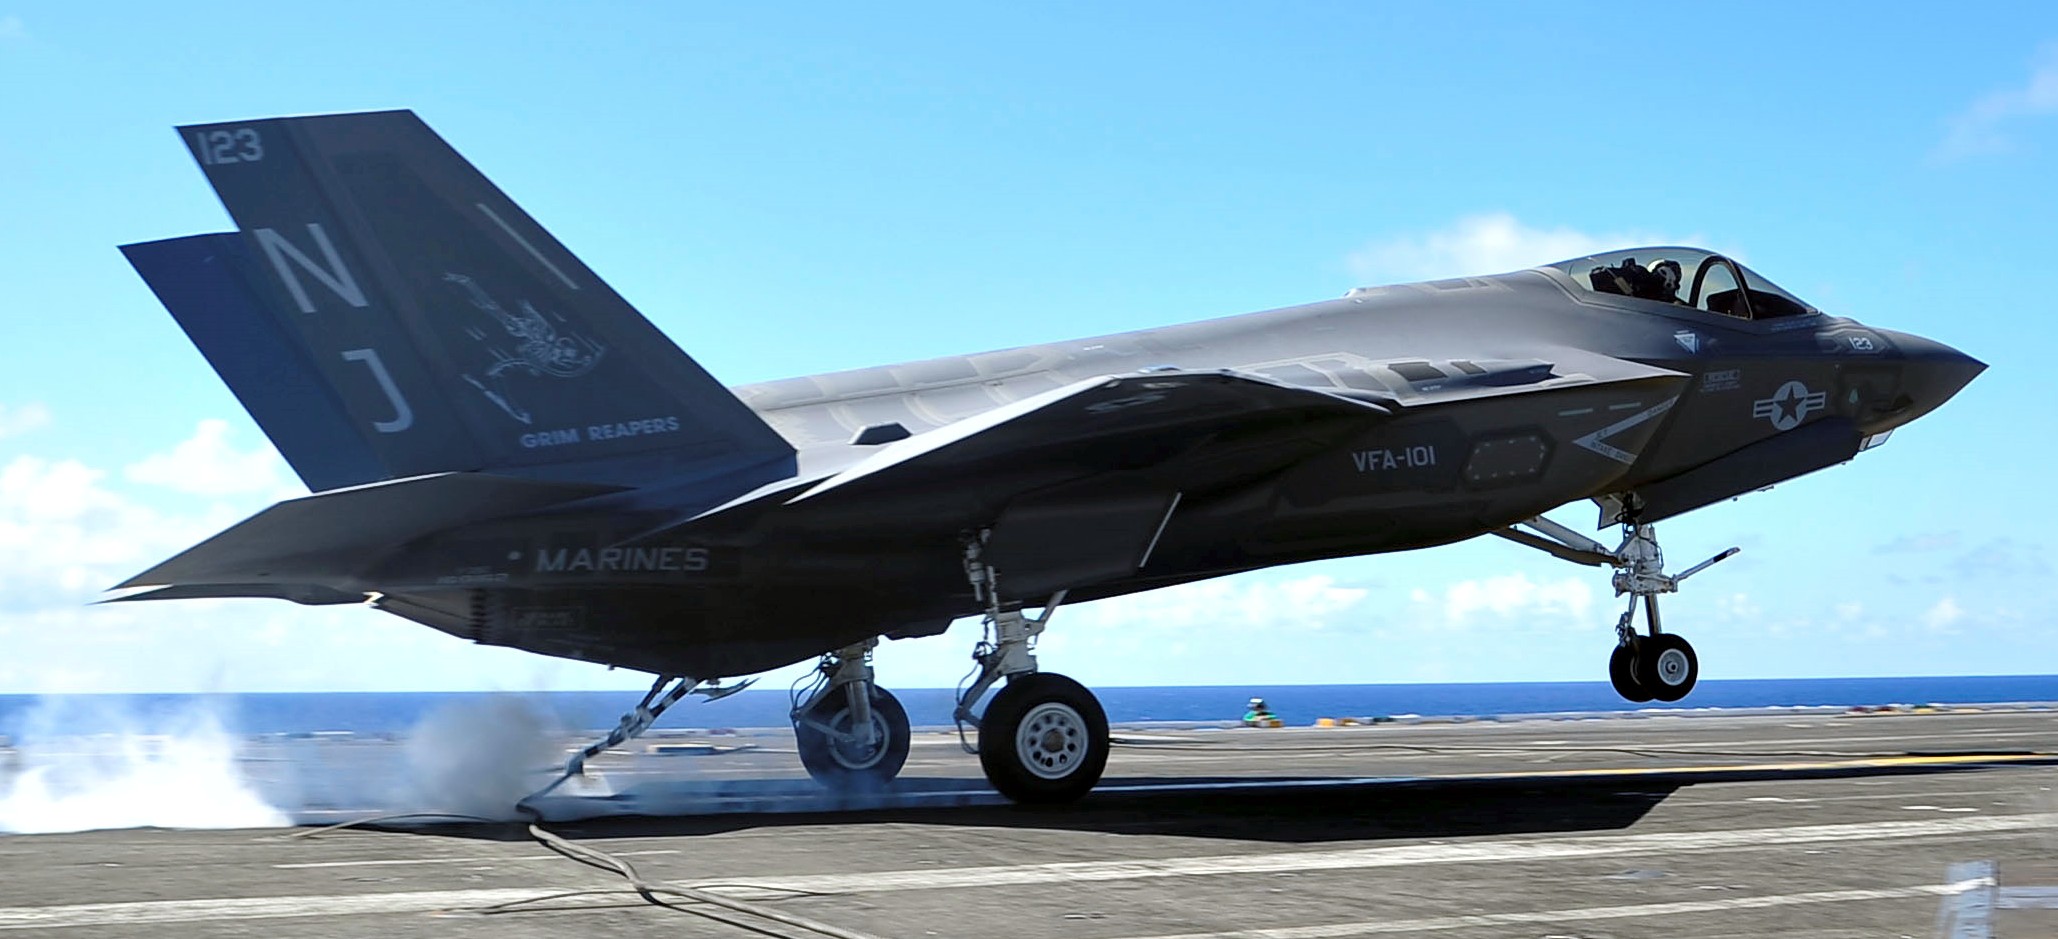 vfa-101 grim reapers strike fighter squadron us navy f-35c lightning jsf frs 51